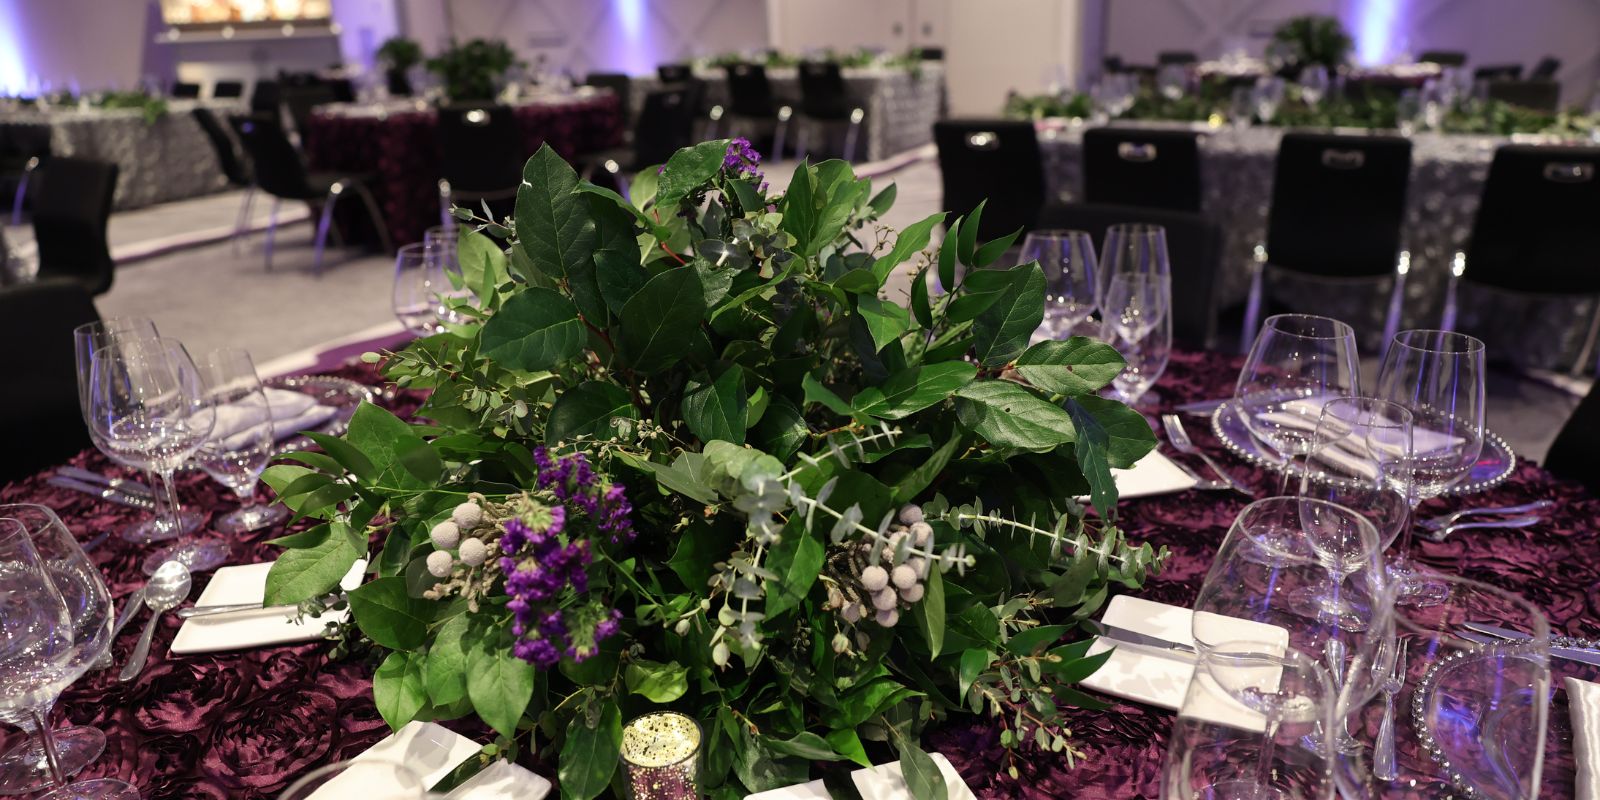 Catering and banquets set up within a meeting space showing floral arrangements and table settings.